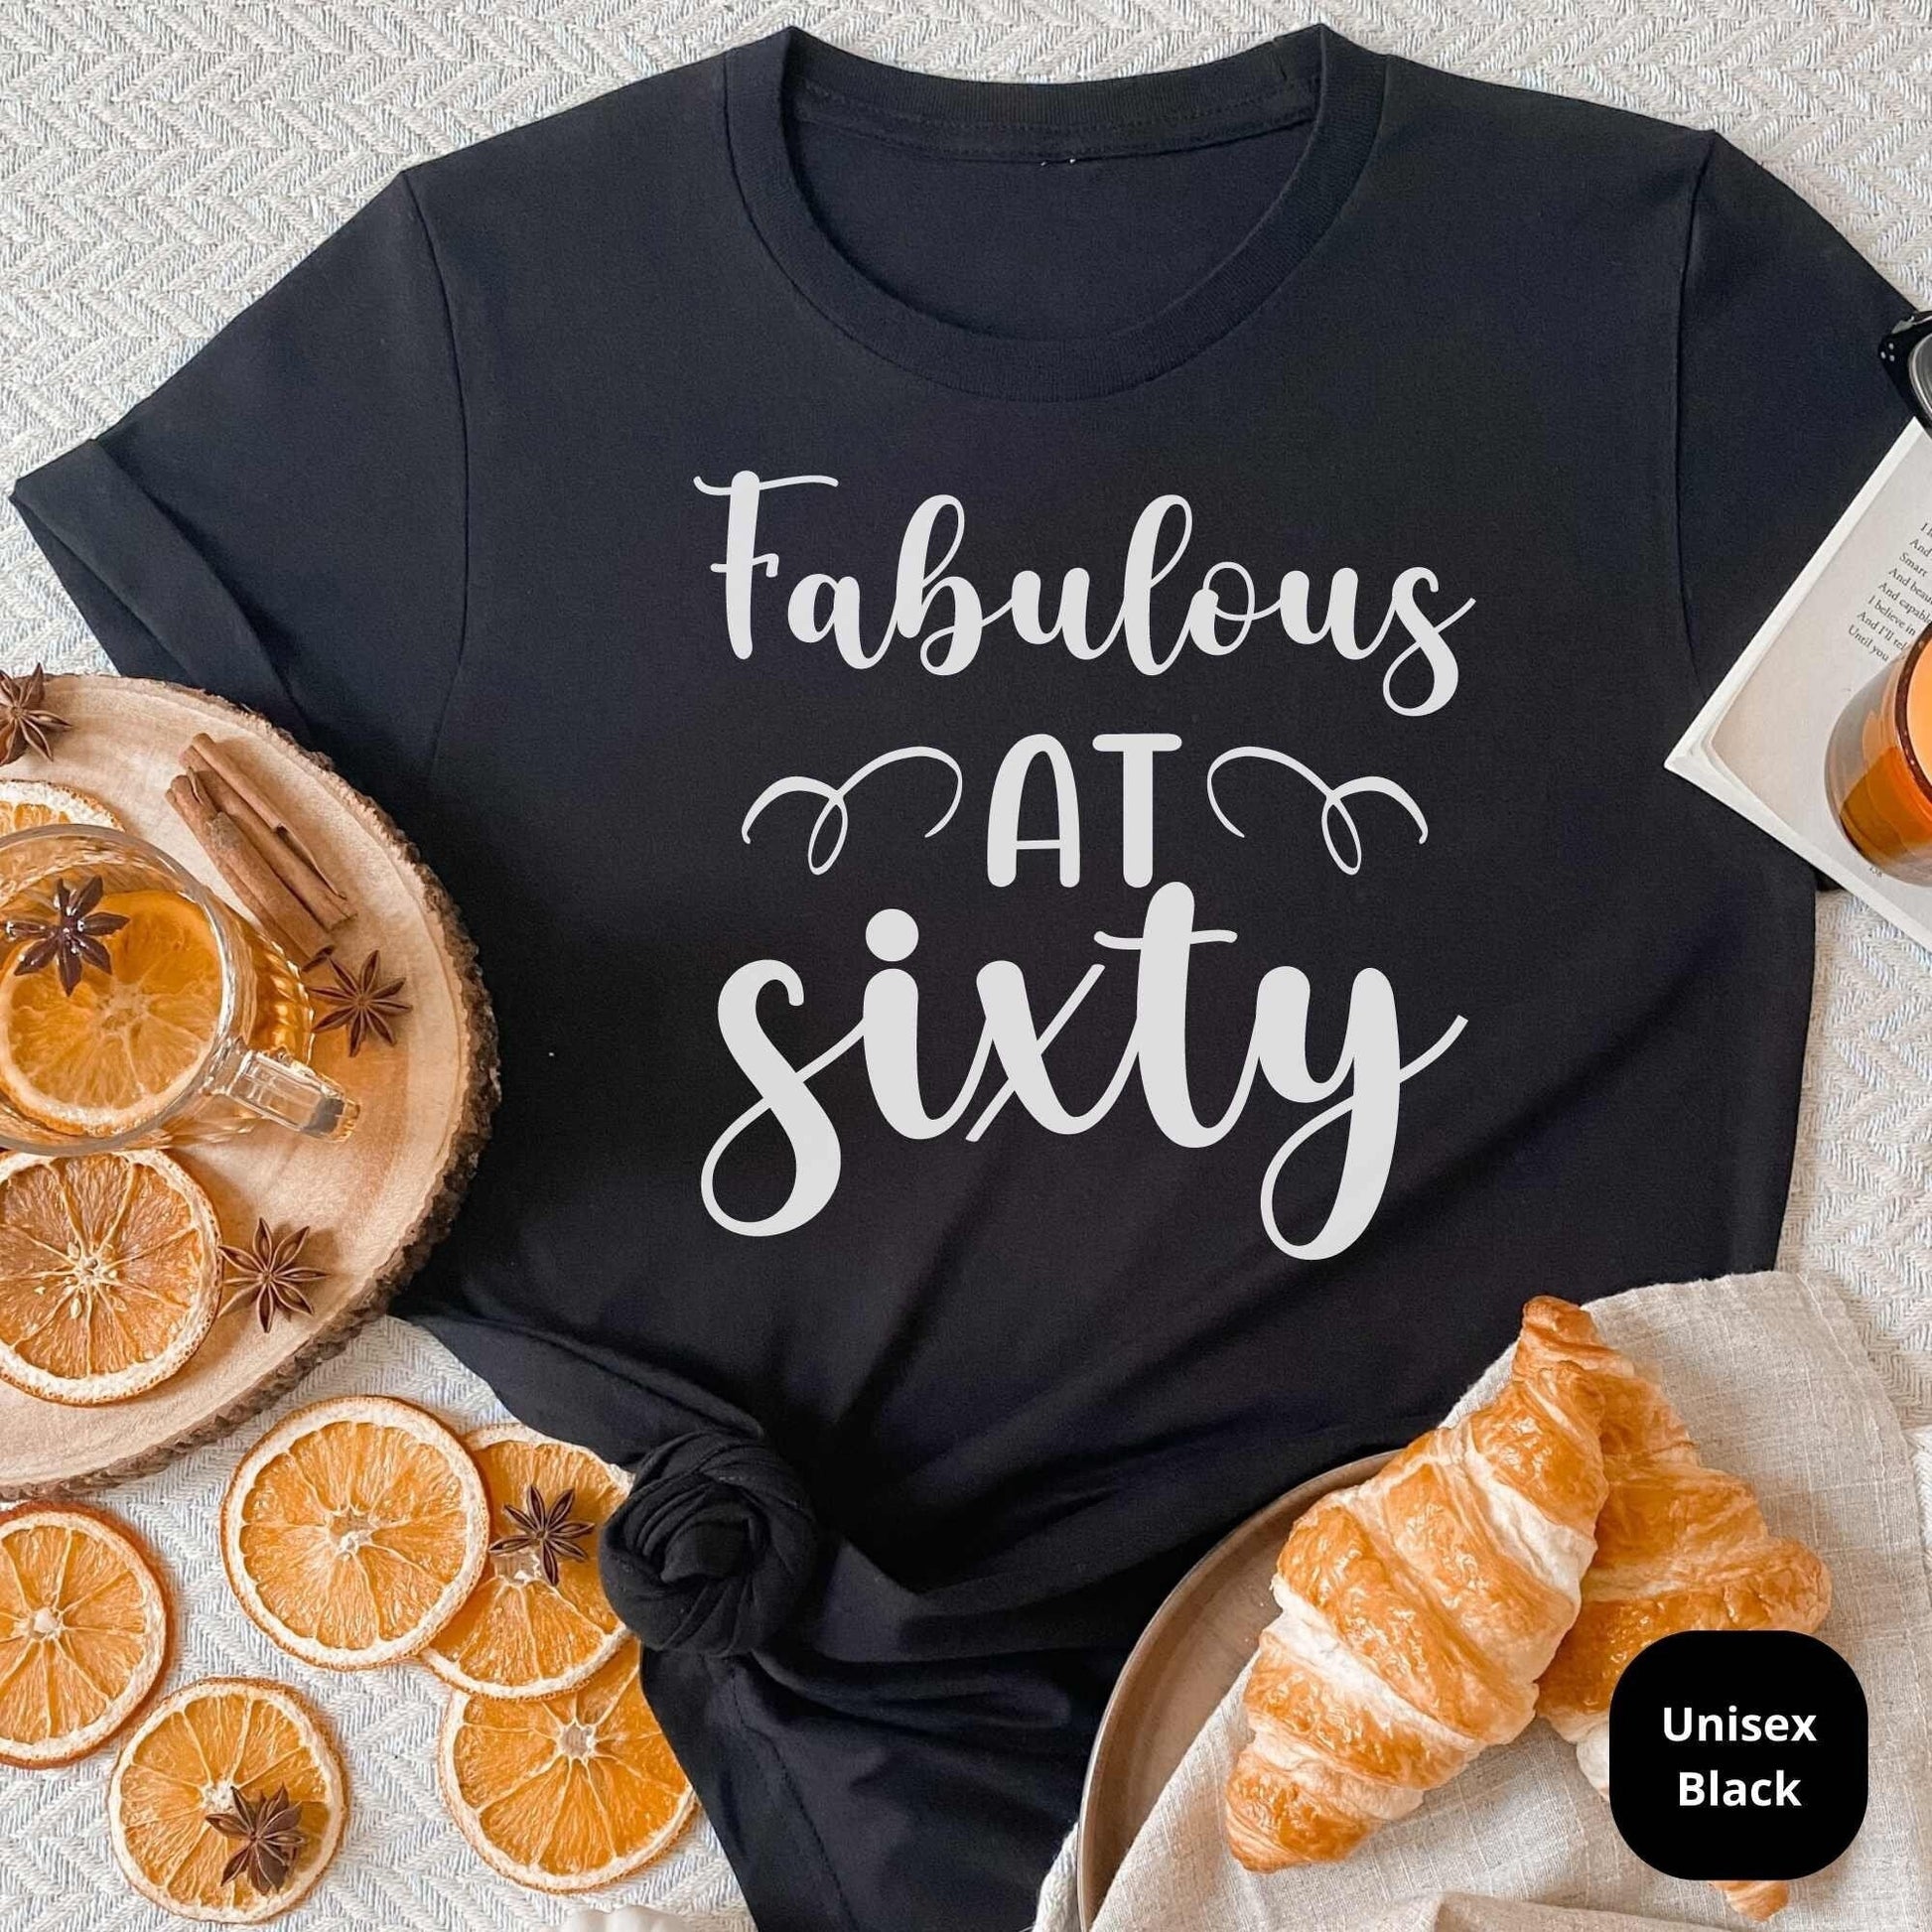 60th Birthday Shirt, Fabulous at 60 Birthday Gift, Great for Grandma, Mom, Aunt, Cousins & Loved Ones Bday Party or Anniversary Celebration